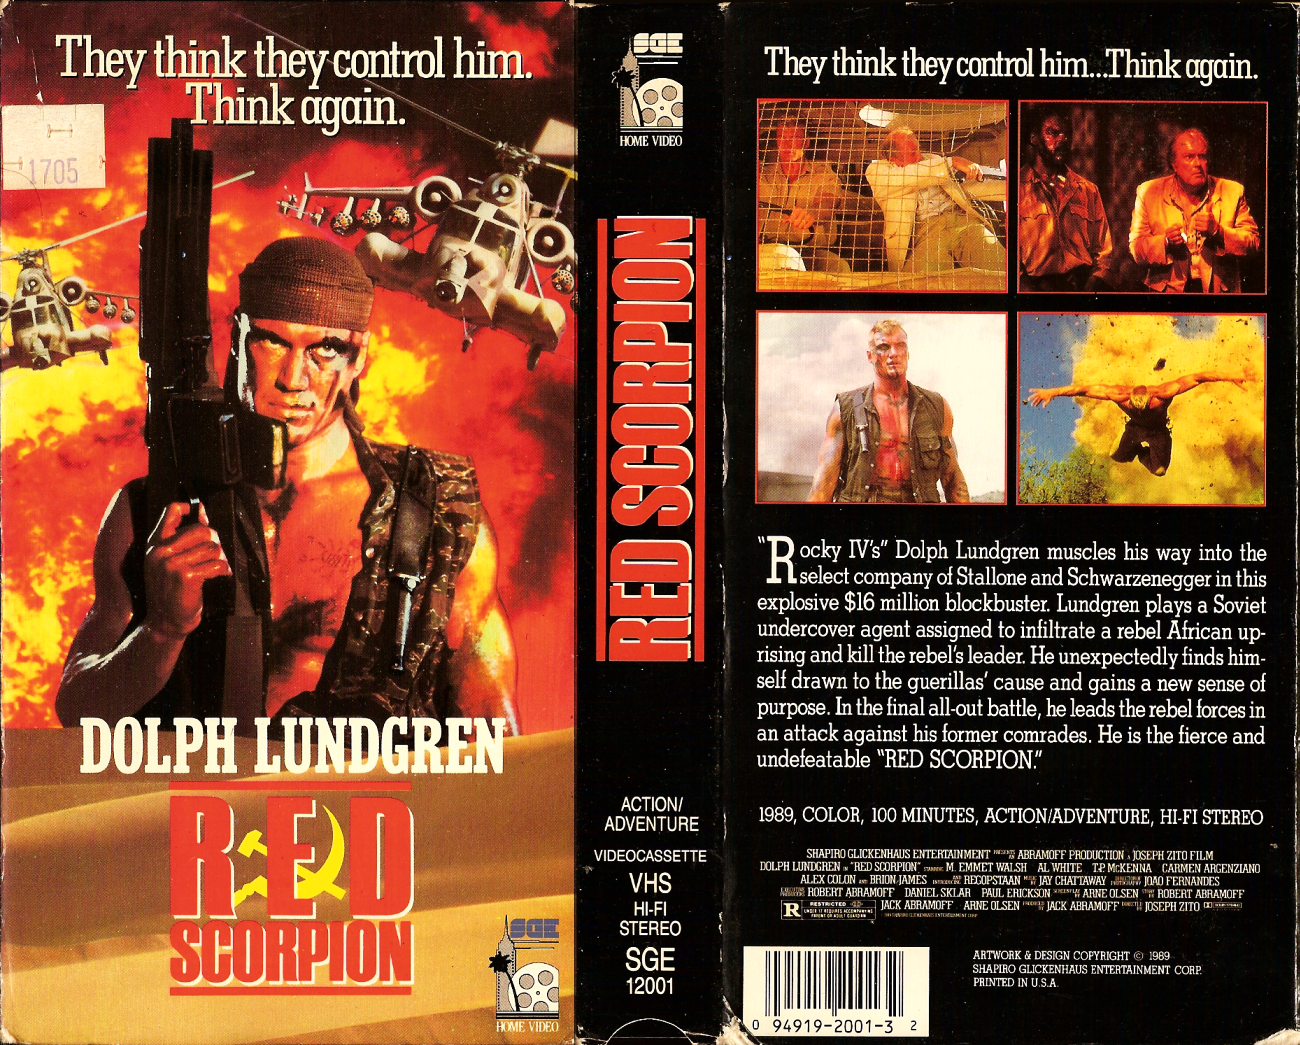 Basement of Ghoulish Decadence: Scorpion (1988) - 1989 SGE Video VHS